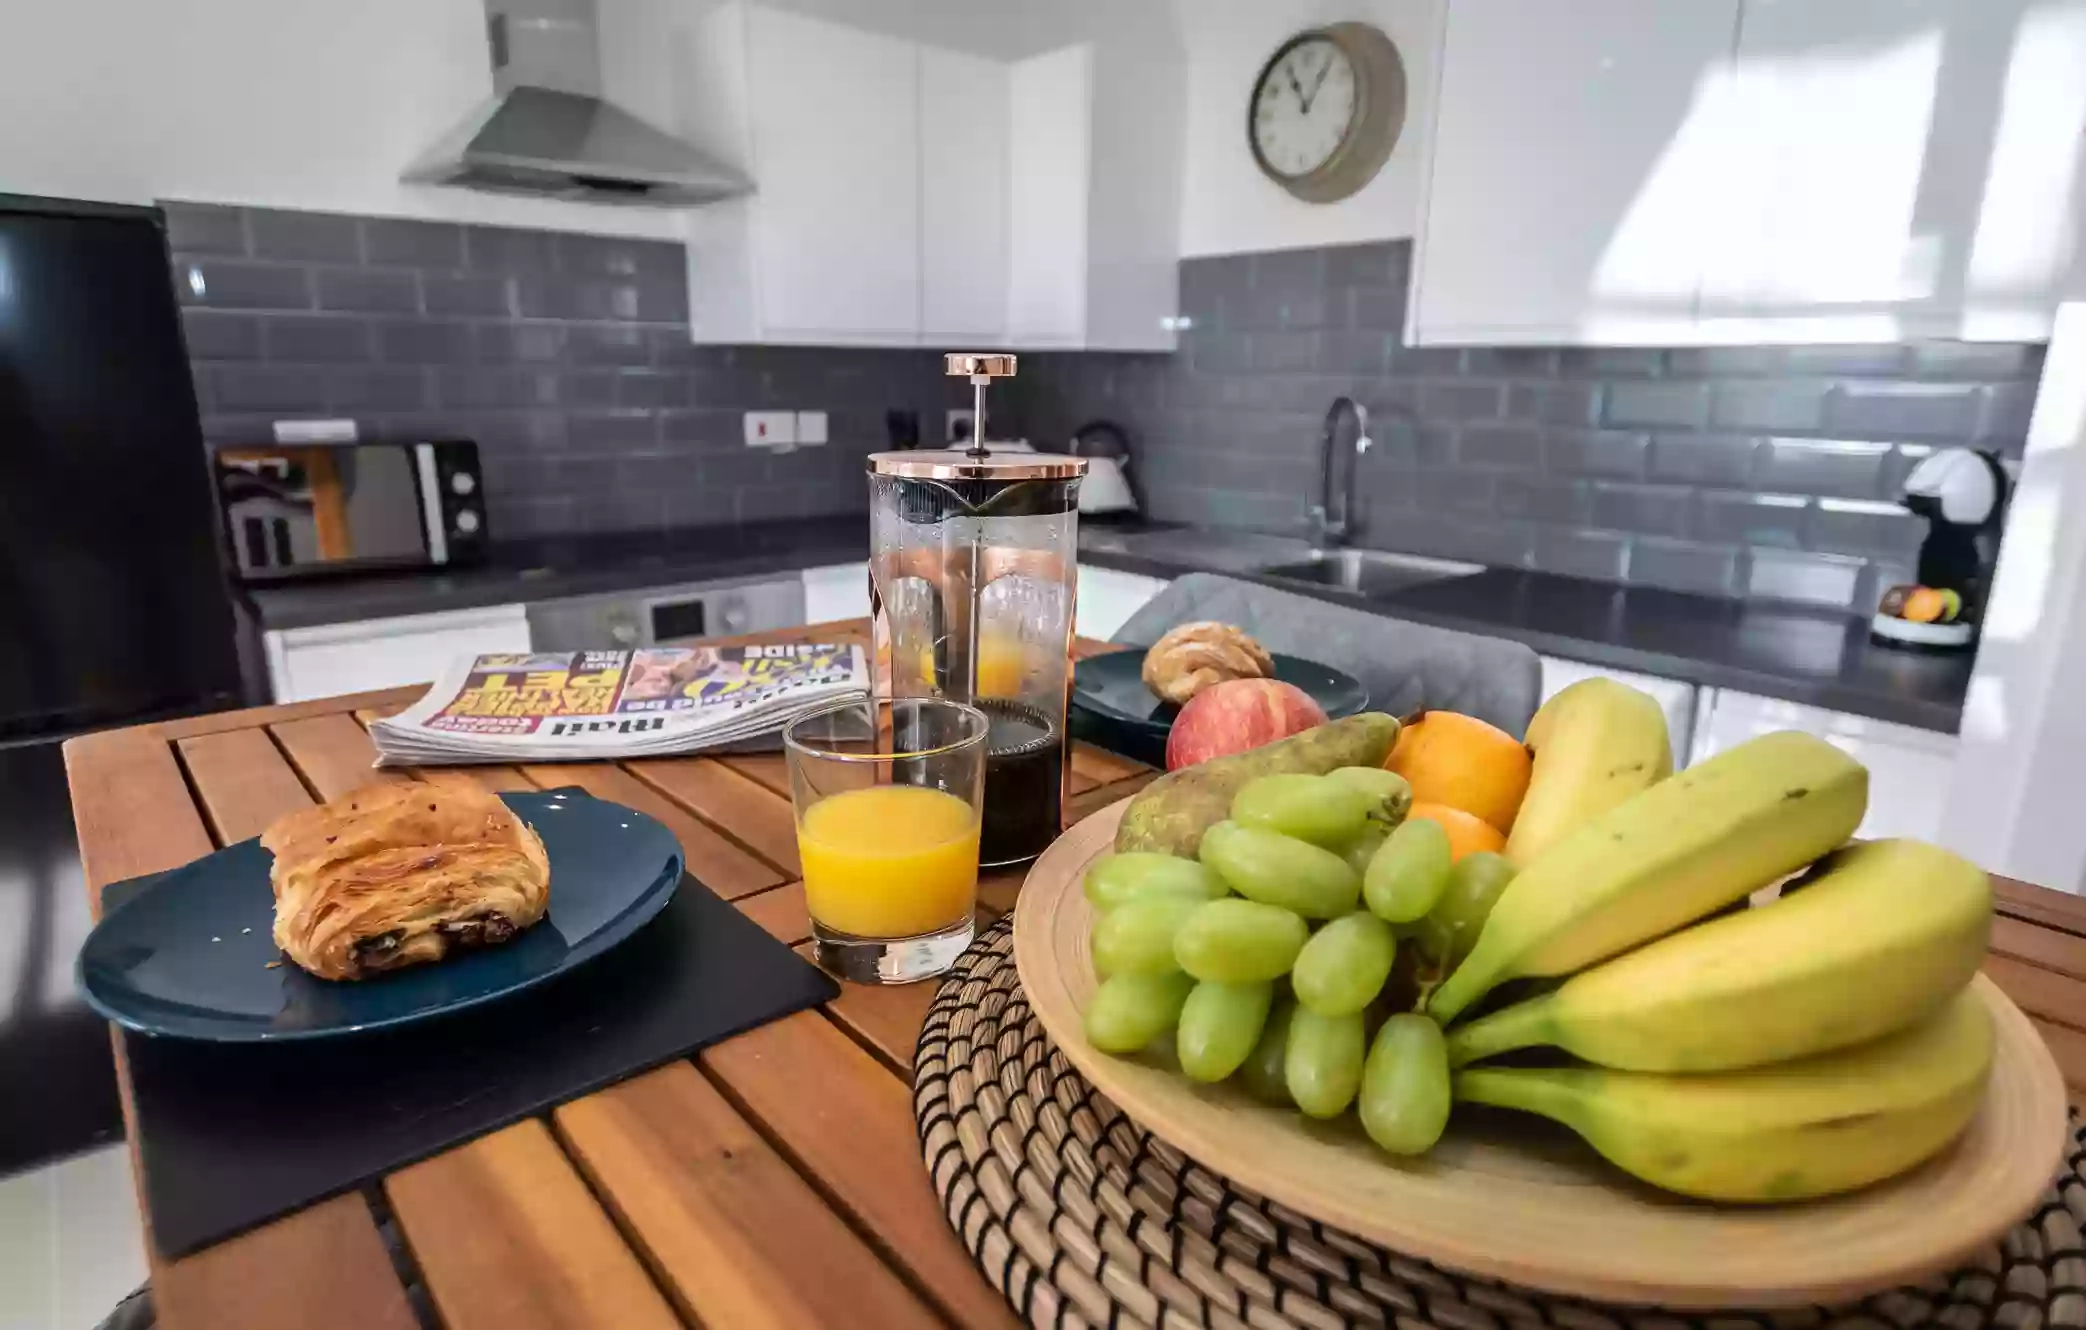 Smart Apartments & Serviced Accommodation Southampton - Atlantic Mansions